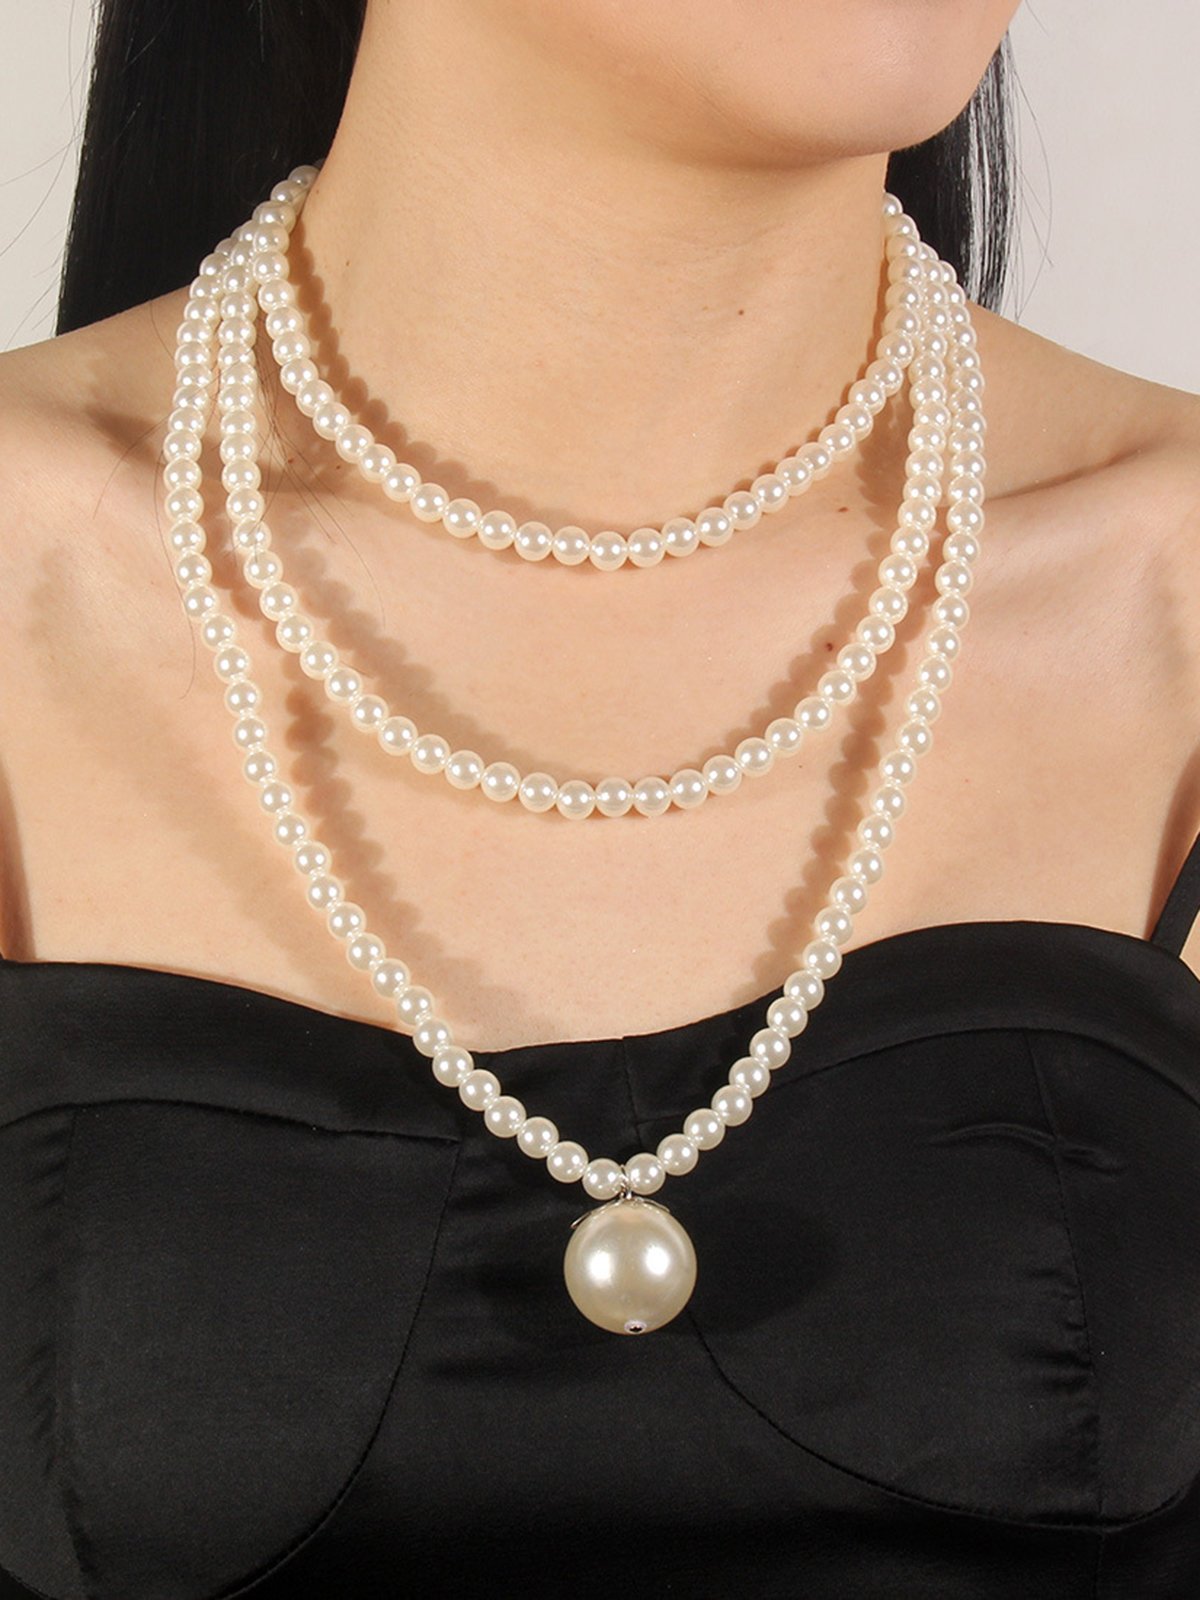 Elegant Imitation Pearl Multilayer Necklace with Dangle Earrings Party Jewelry Set